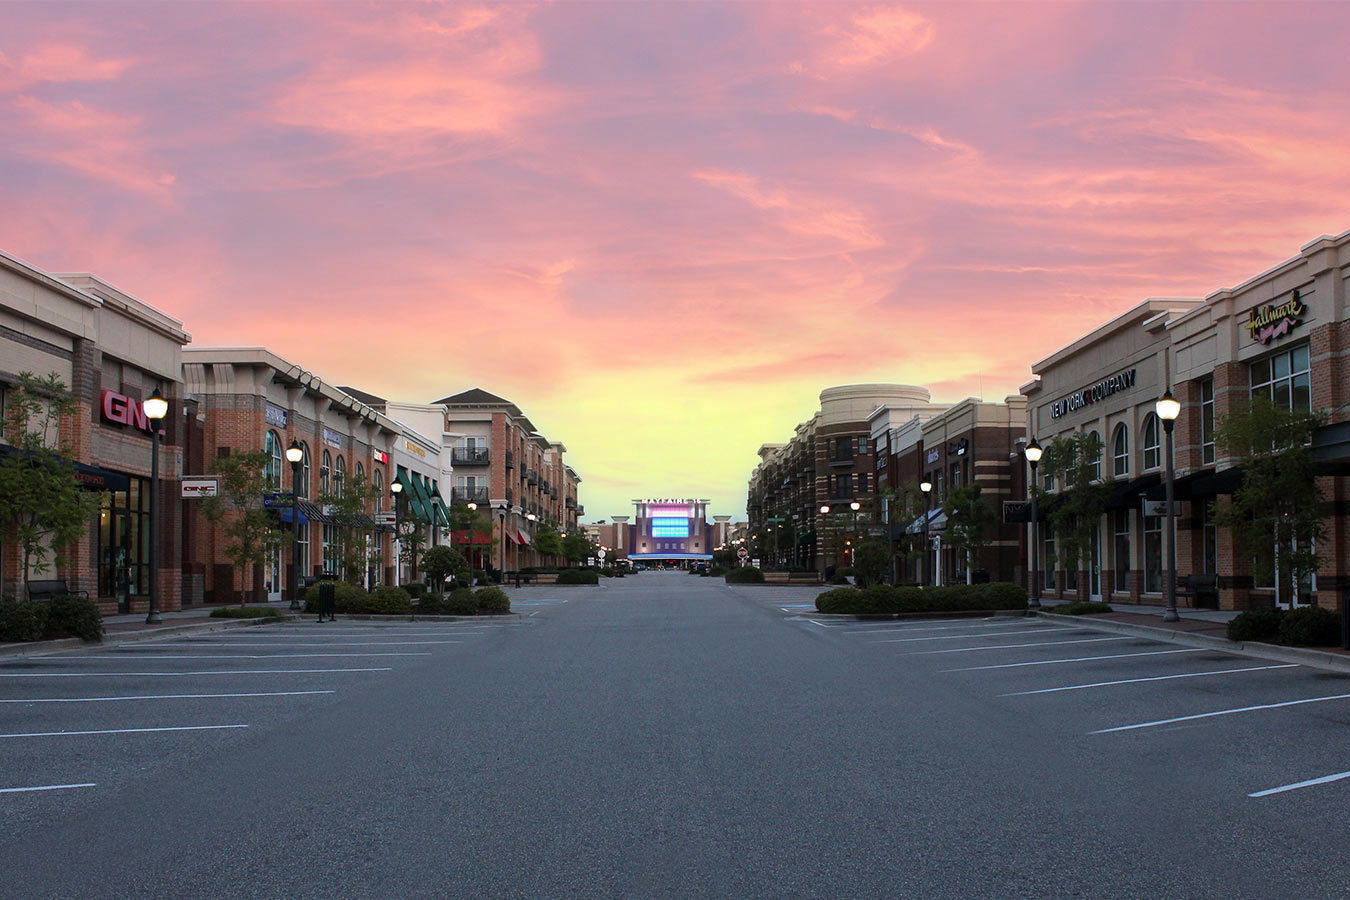 Mayfaire Town Center offers upscale shopping and dining near Wrightsville Beach.